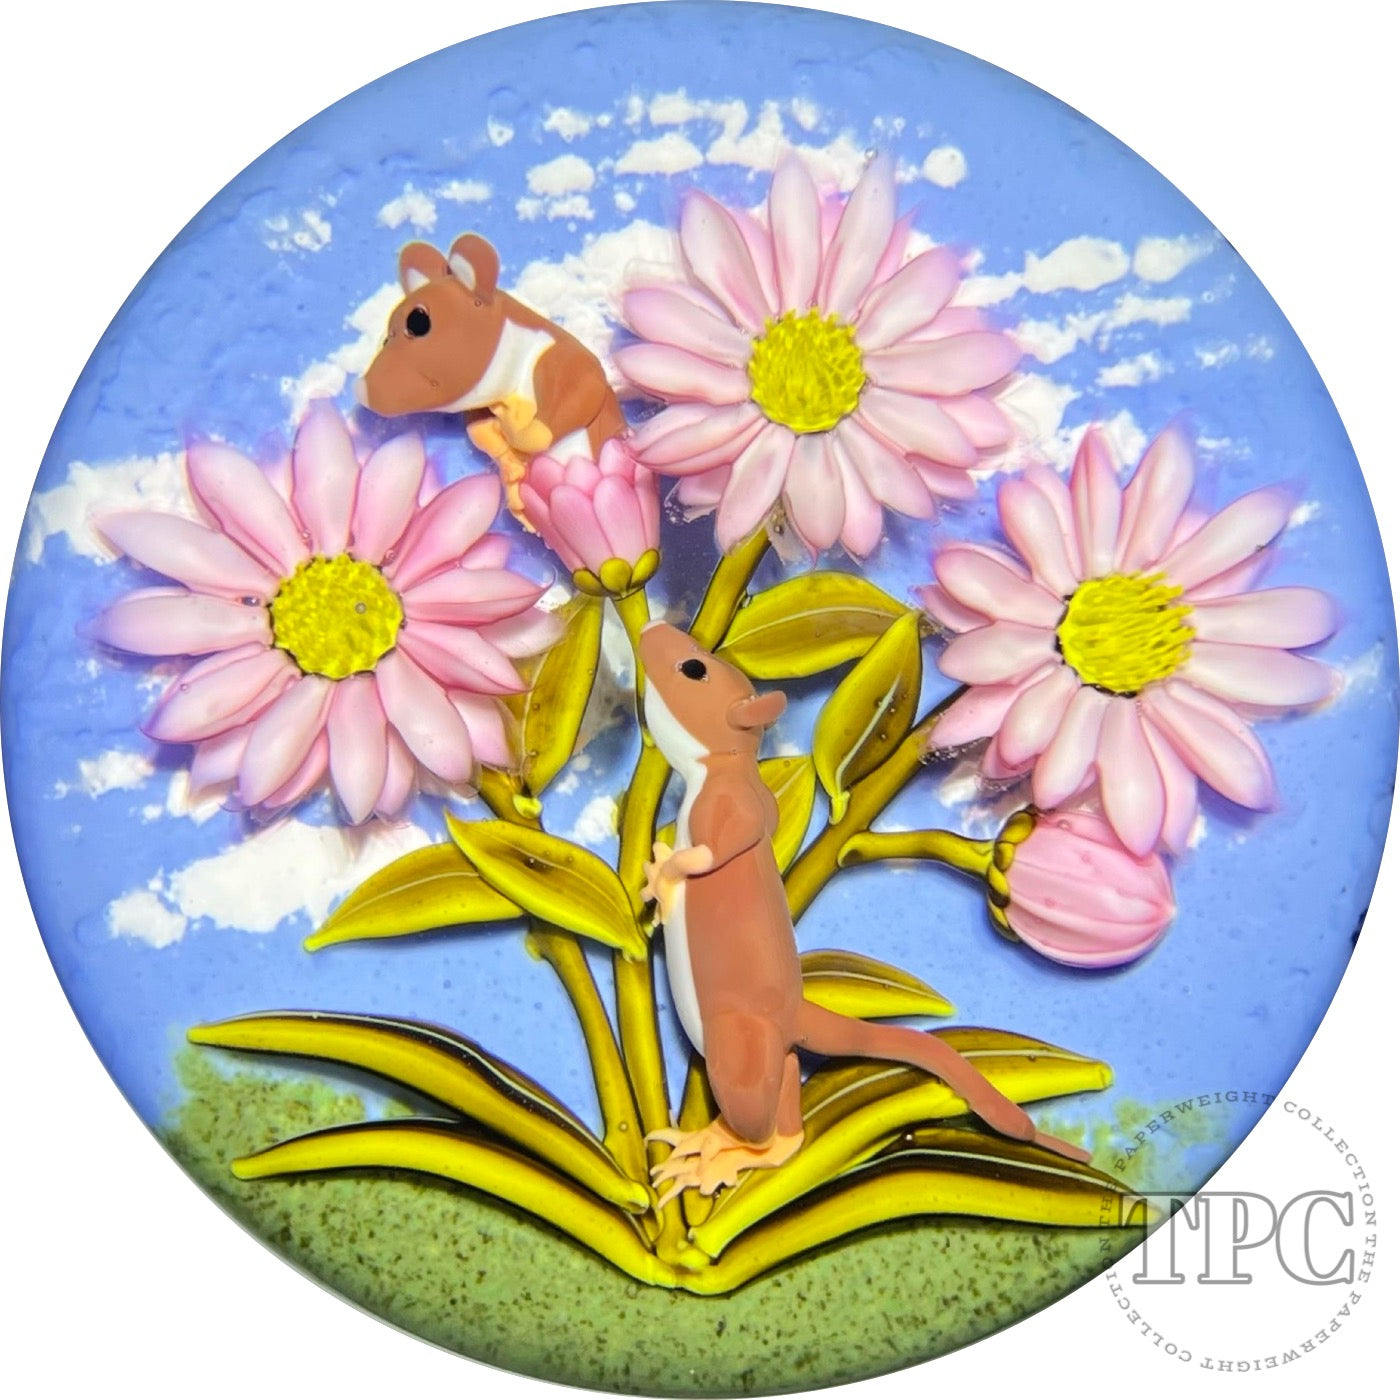 Clinton Smith 2022 Glass Art Paperweight Flamework Field Mice Frolicking in Pink Daisies